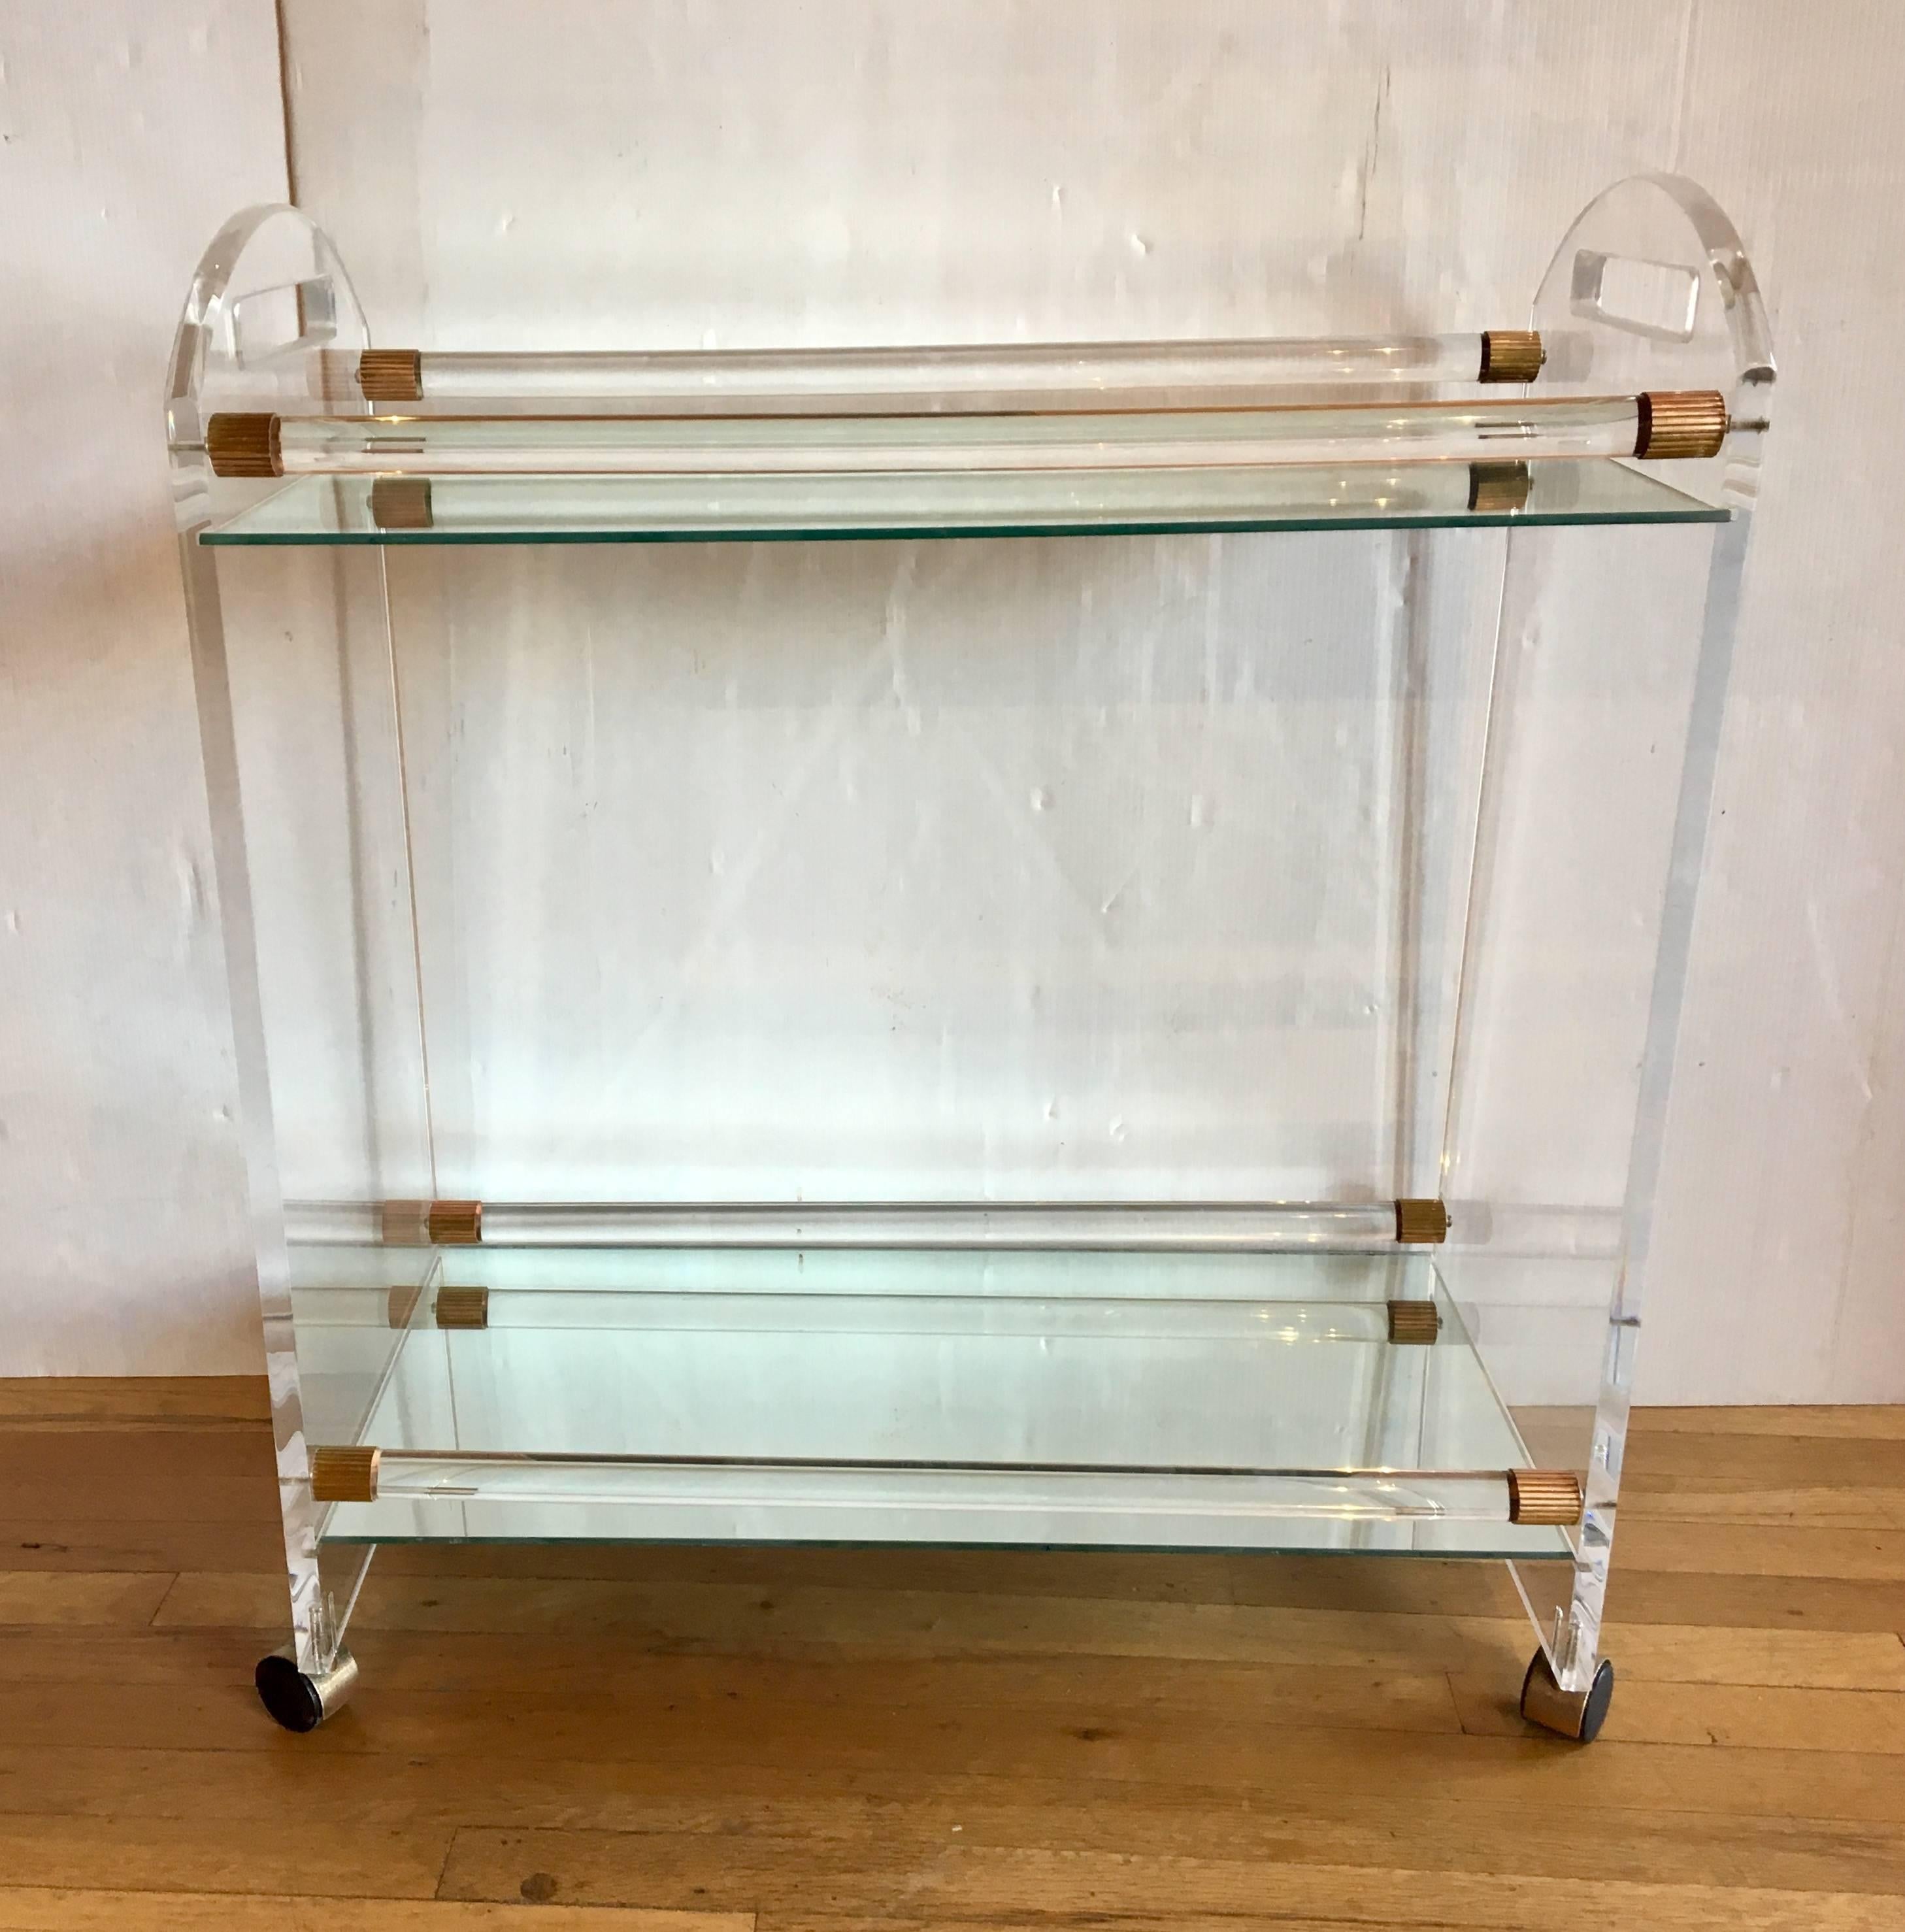 Elegant unique bar cart, circa 1970s, we polished the Lucite and the brass accents and mirrors the casters shows some wear on the top as shown due to age, overall nice clean condition.